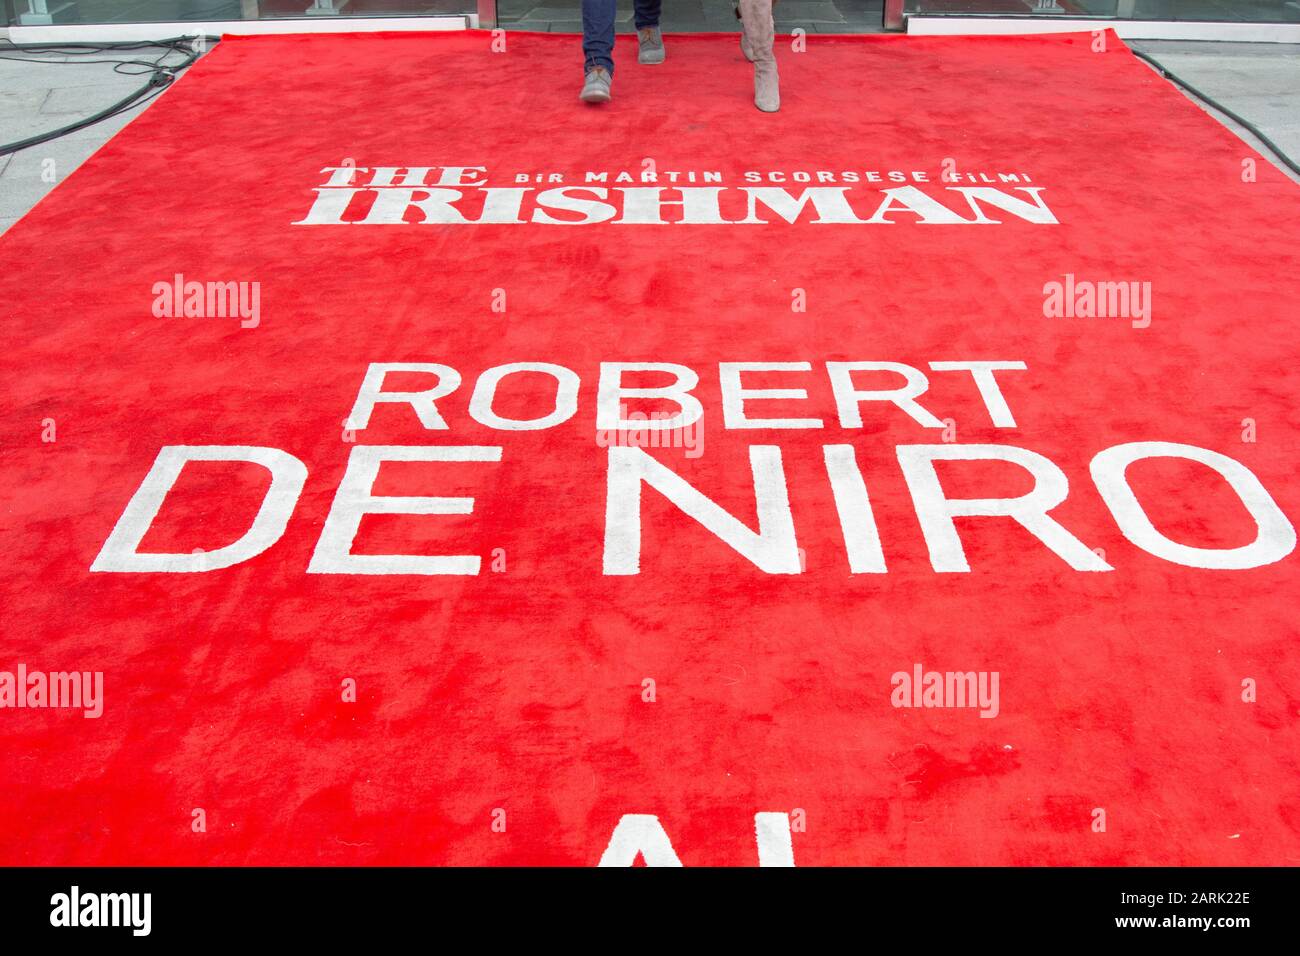 Logo of the movie of The Irishman and name of Robert De Niro on red carpet in Netflix event. Stock Photo